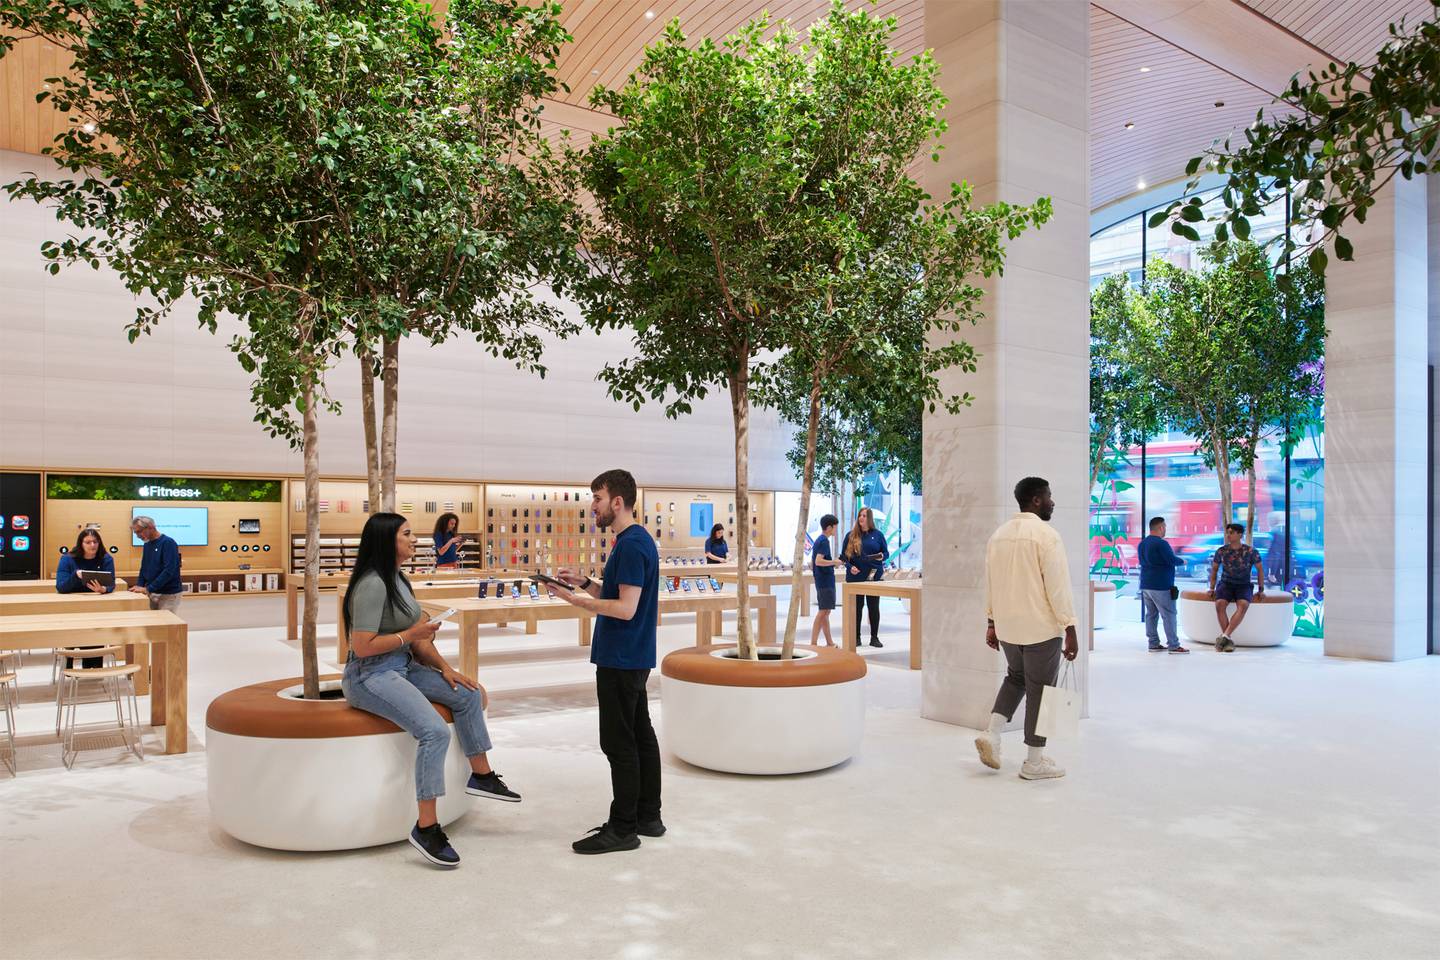 The Apple Brompton Road store in London. Photo: Apple